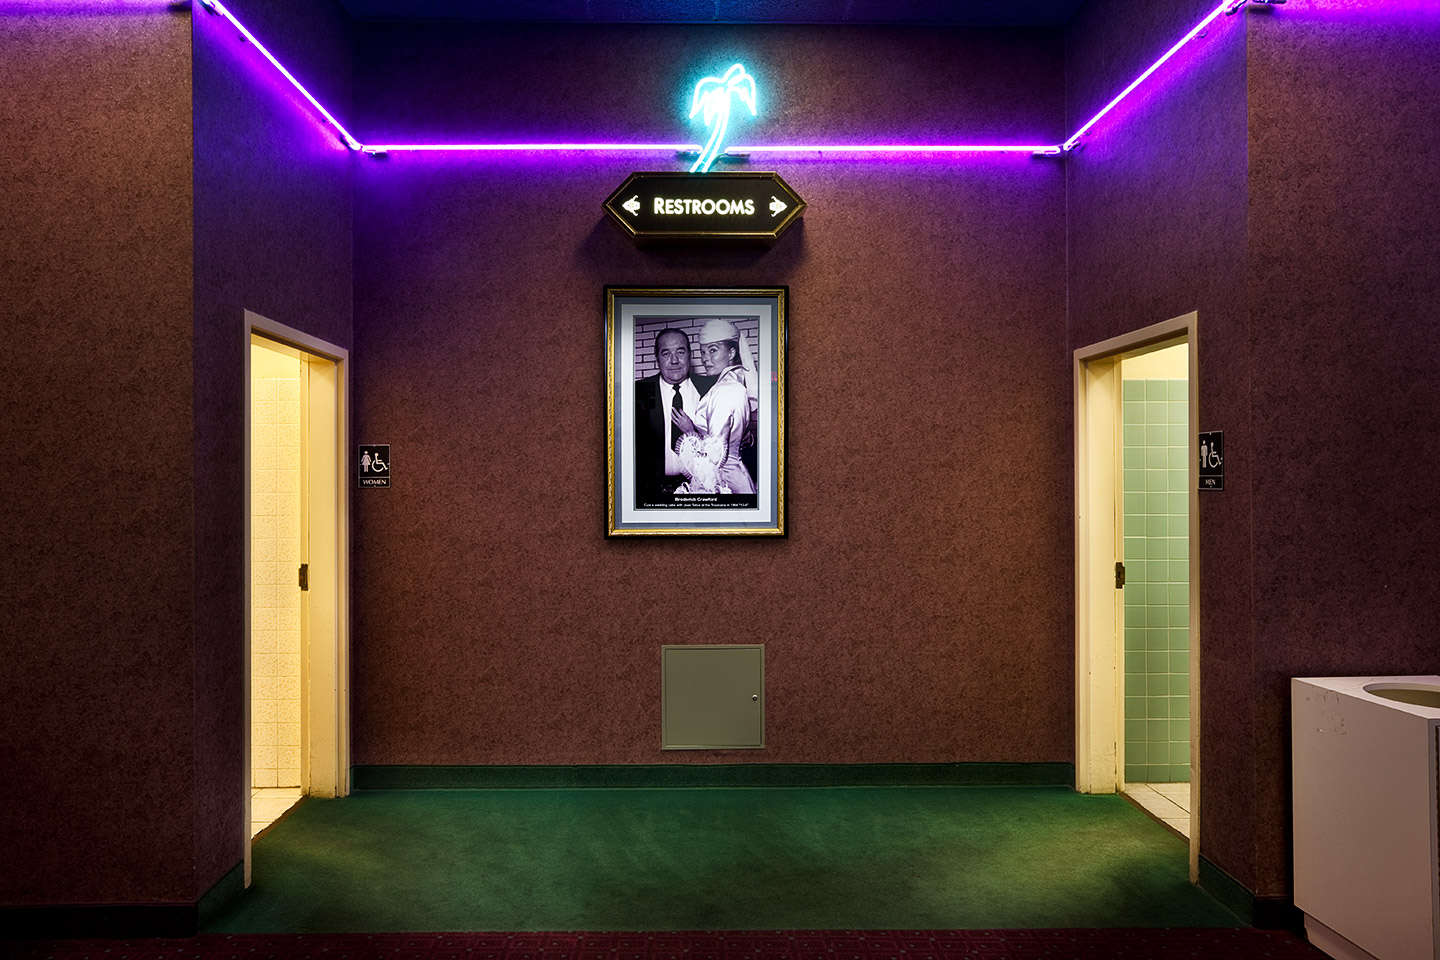 Restroom area Tropicana Hotel, Las Vegas, Nevada. : On The Road : New York City based photographer and video specializing in portrait corporate portraits, video, editorial stories for on location and architectural photography